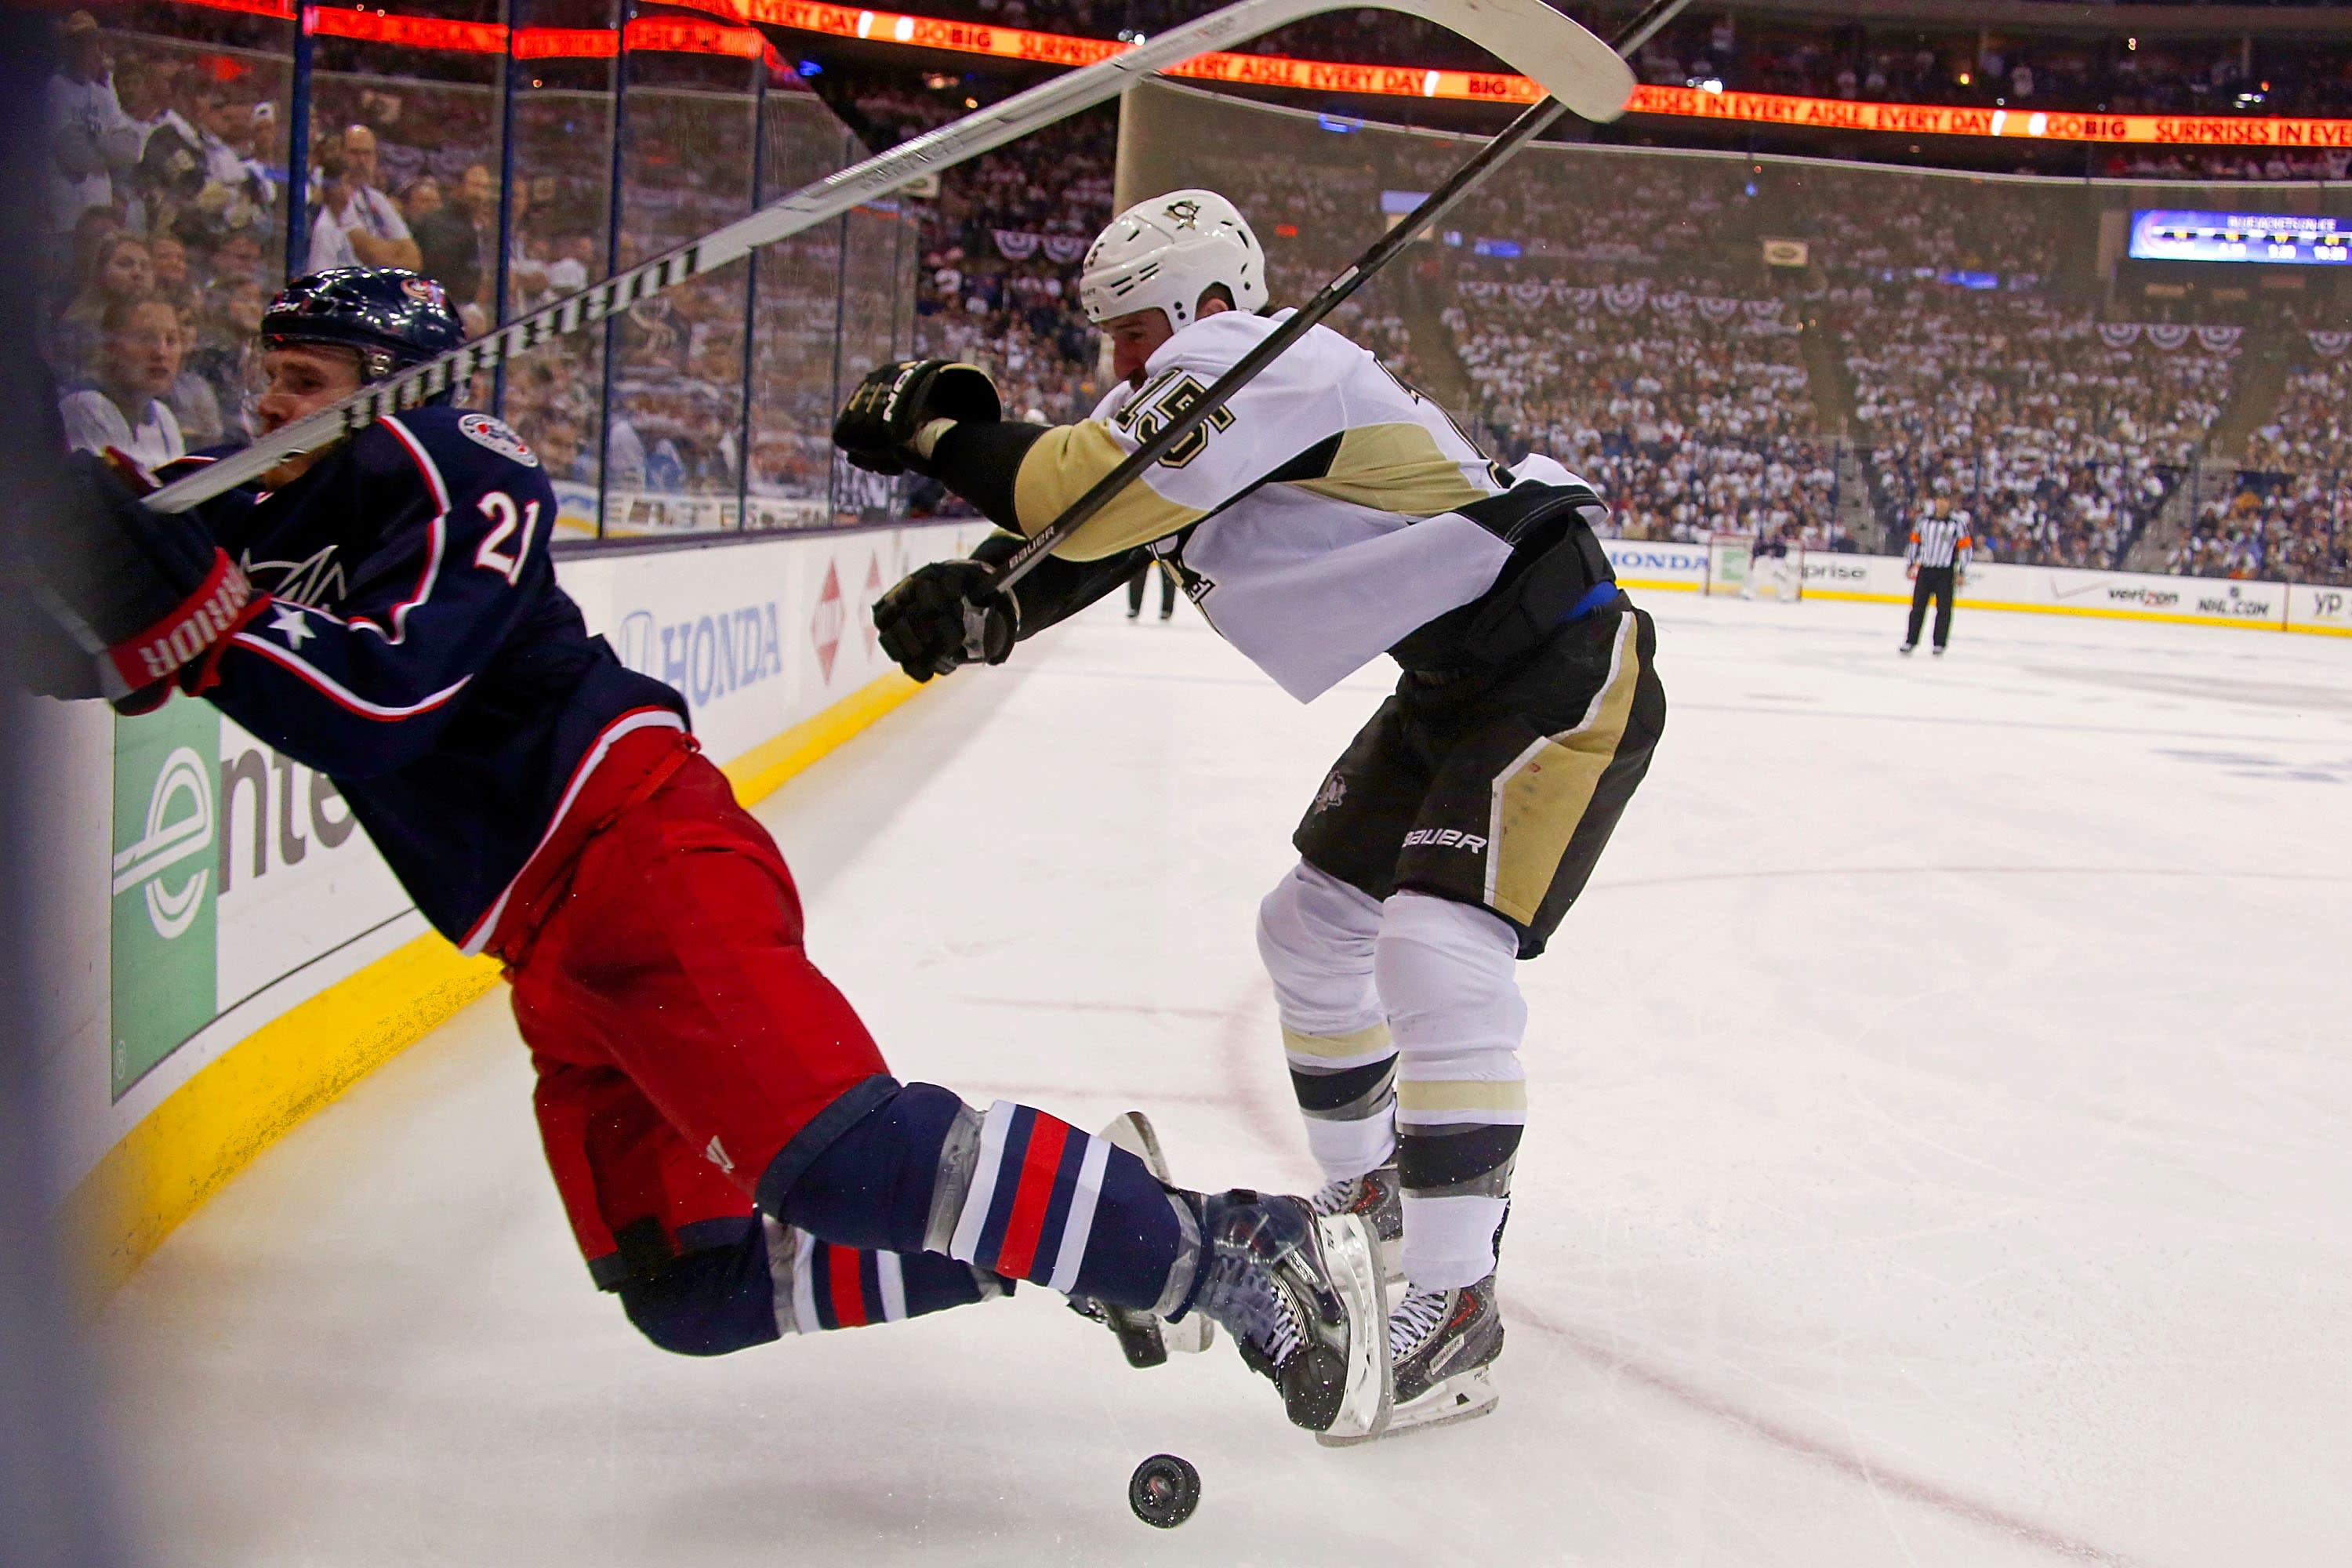 This is why NHL concussion protocols fail